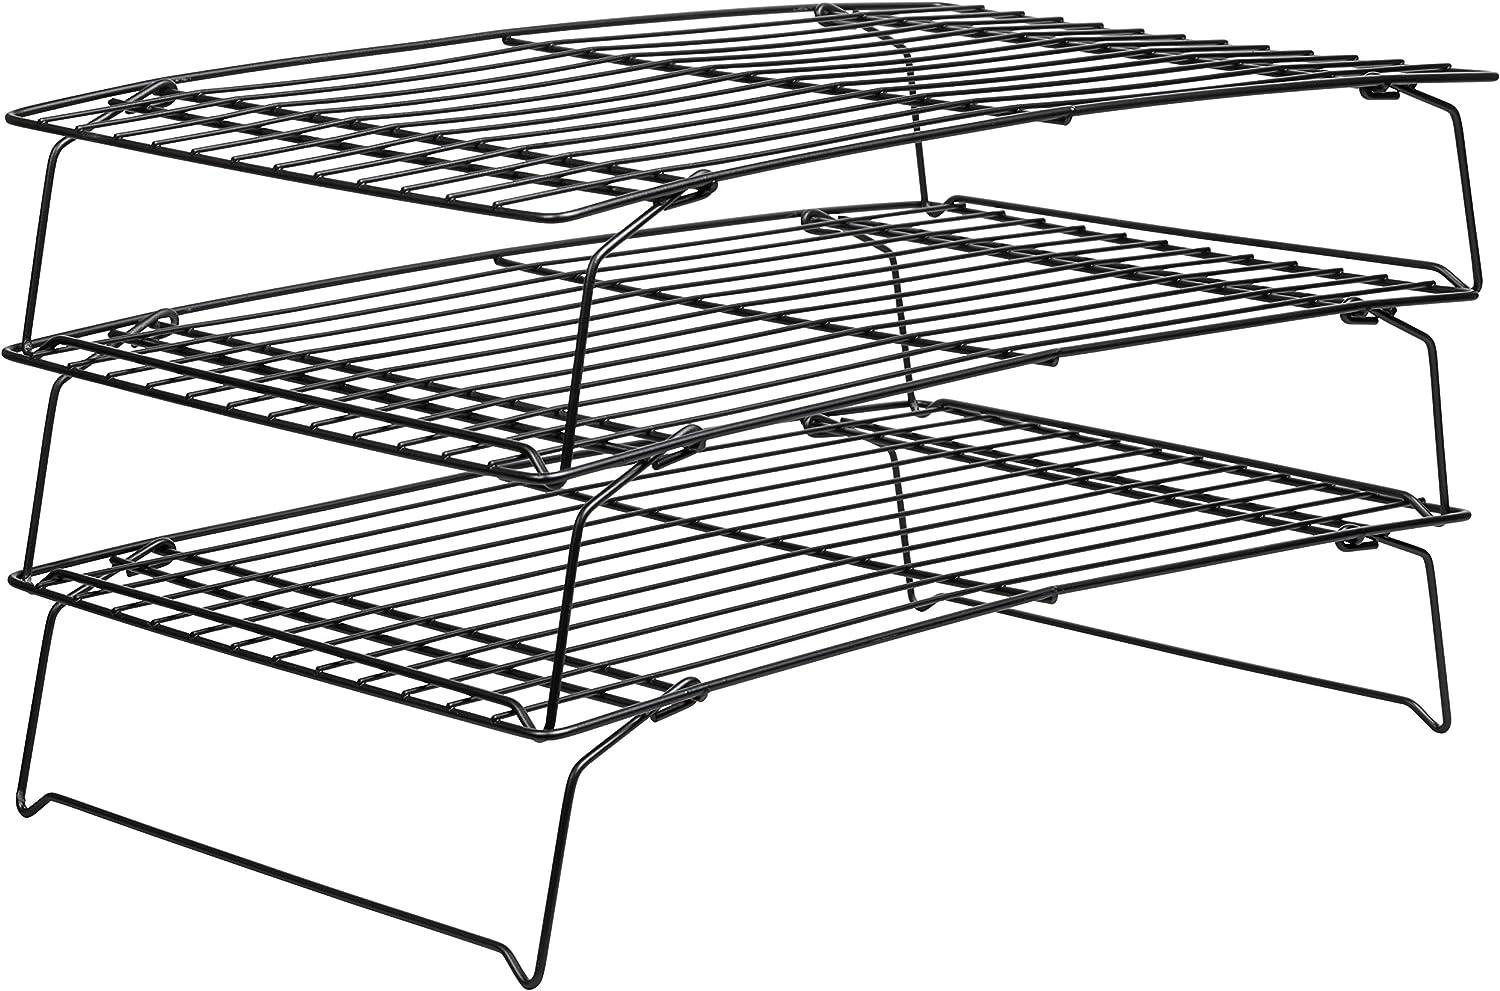 Wilton Perfect Results 3-Tier Cooling Rack for $7.49